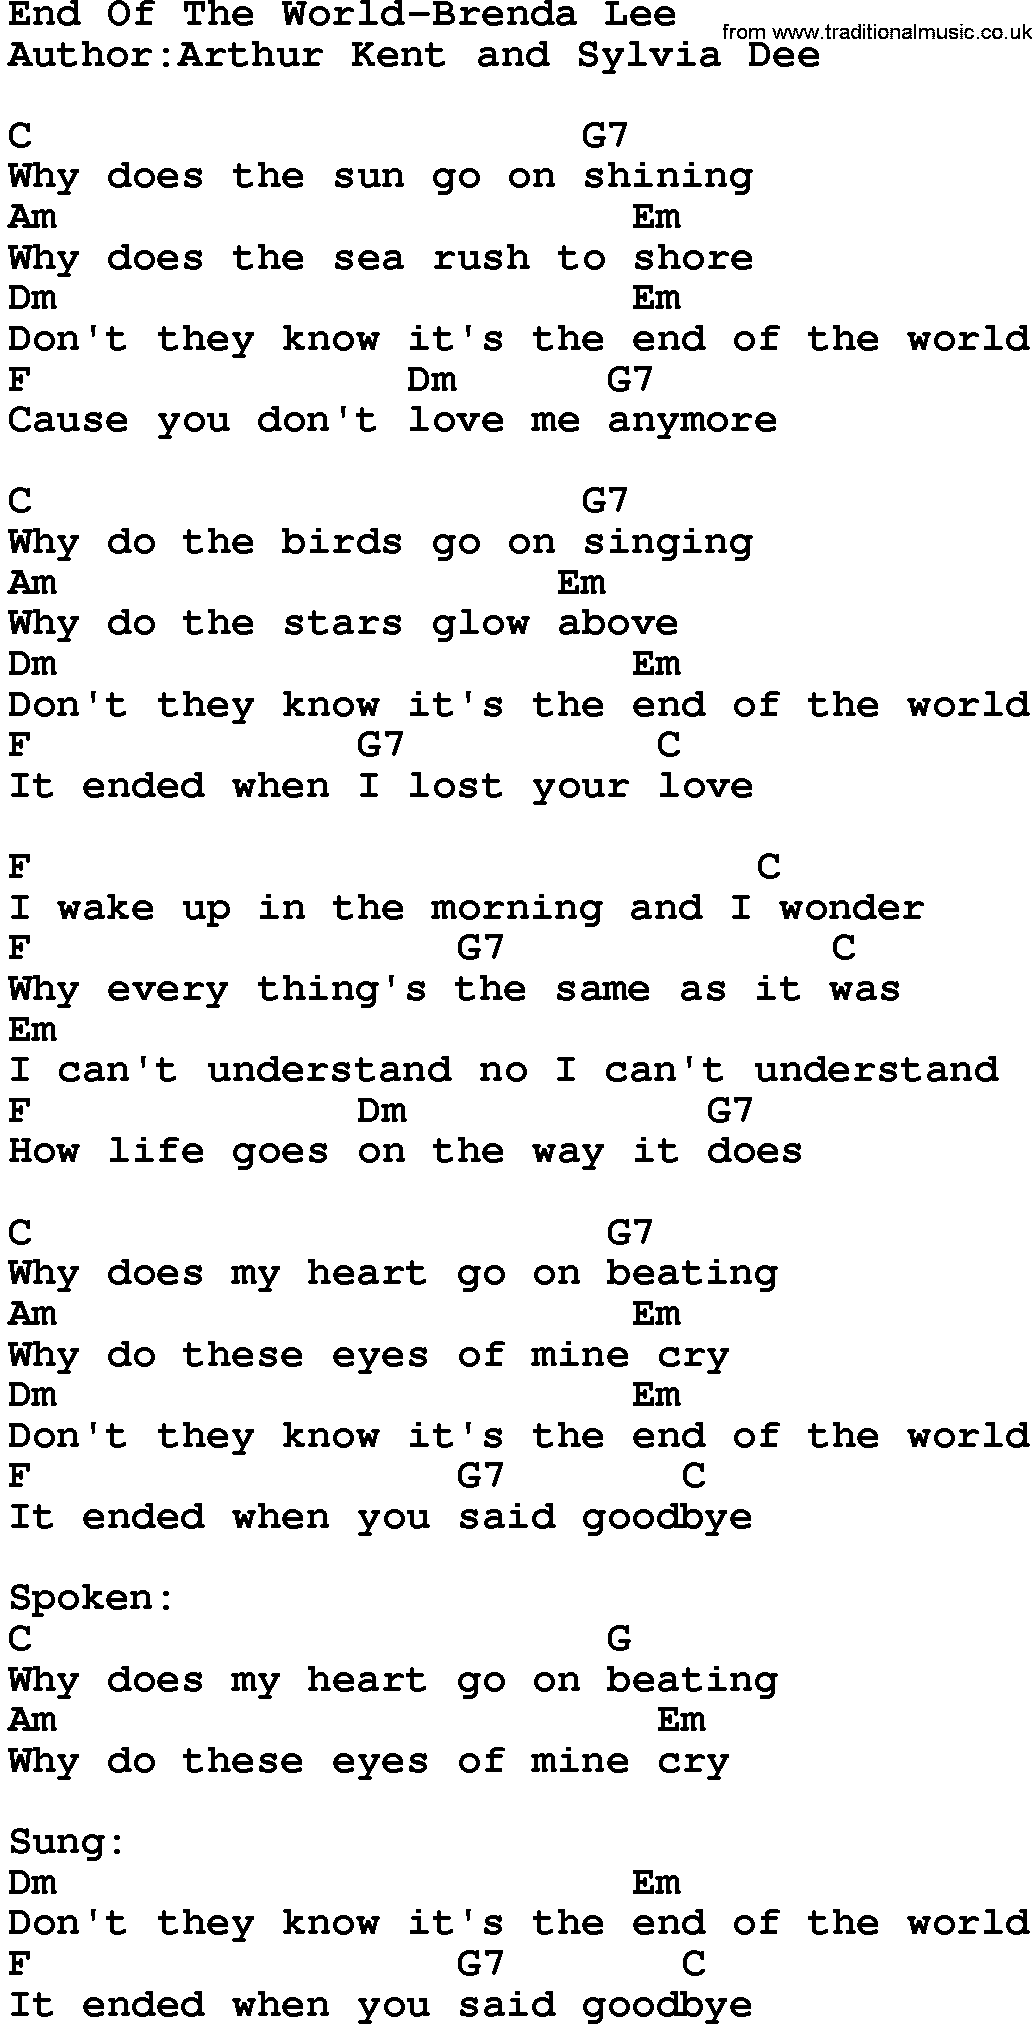 Country Music:End Of The World-Brenda Lee Lyrics and Chords